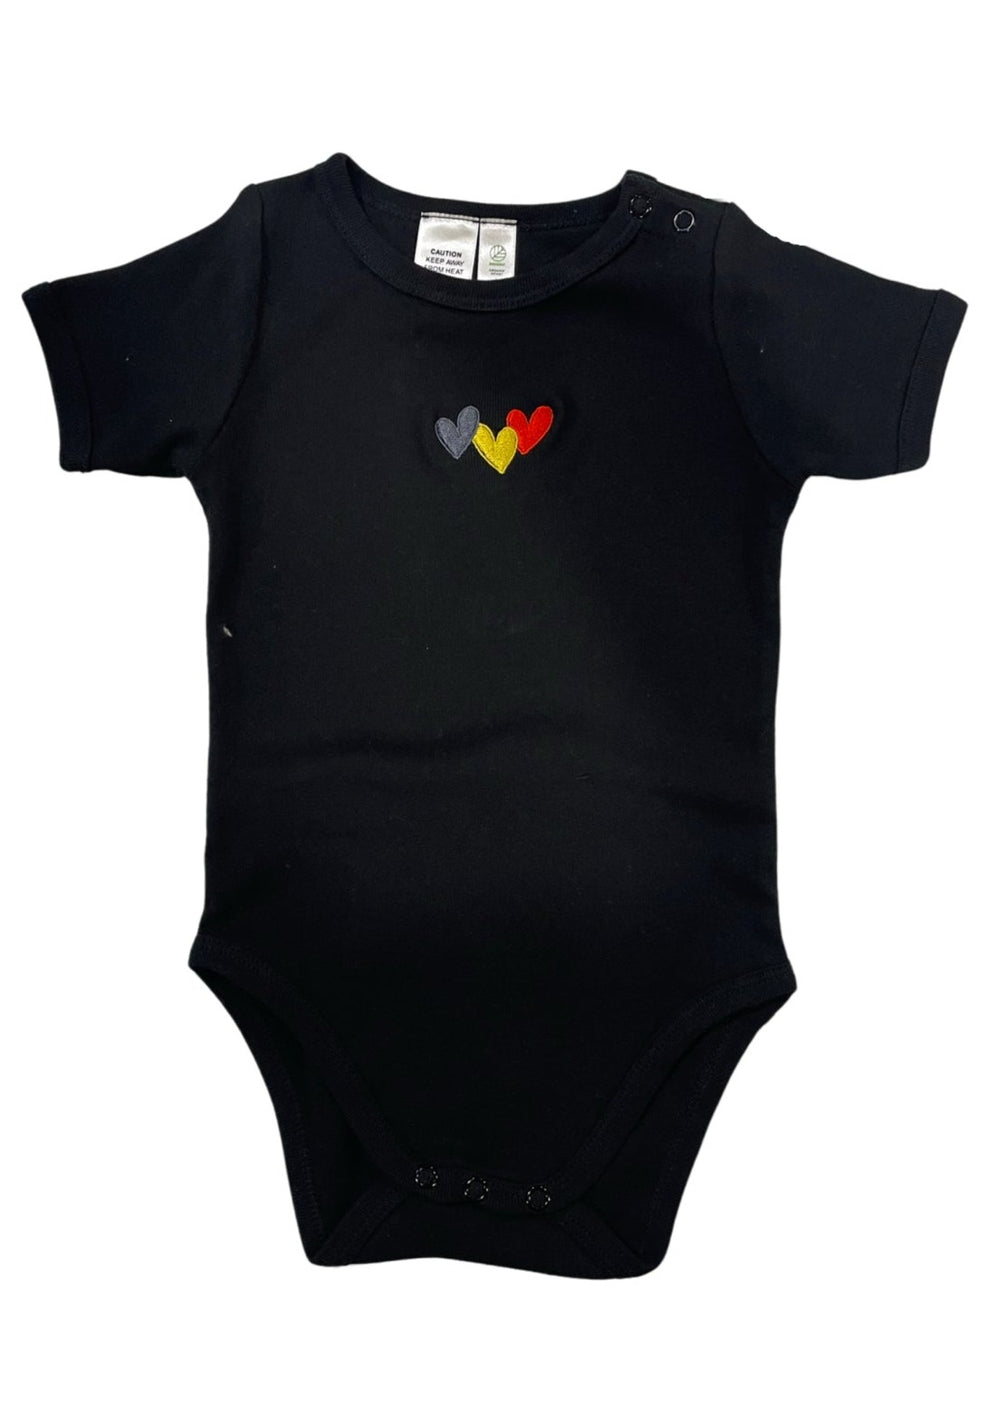 Clothing The Gaps. Blak Luv Bubup Baby Romper. Organic Cotton. All black with  Red, black and yellow hearts embroiled on front. Short sleeve, with clip buttons on left shoulder and on the bottom.